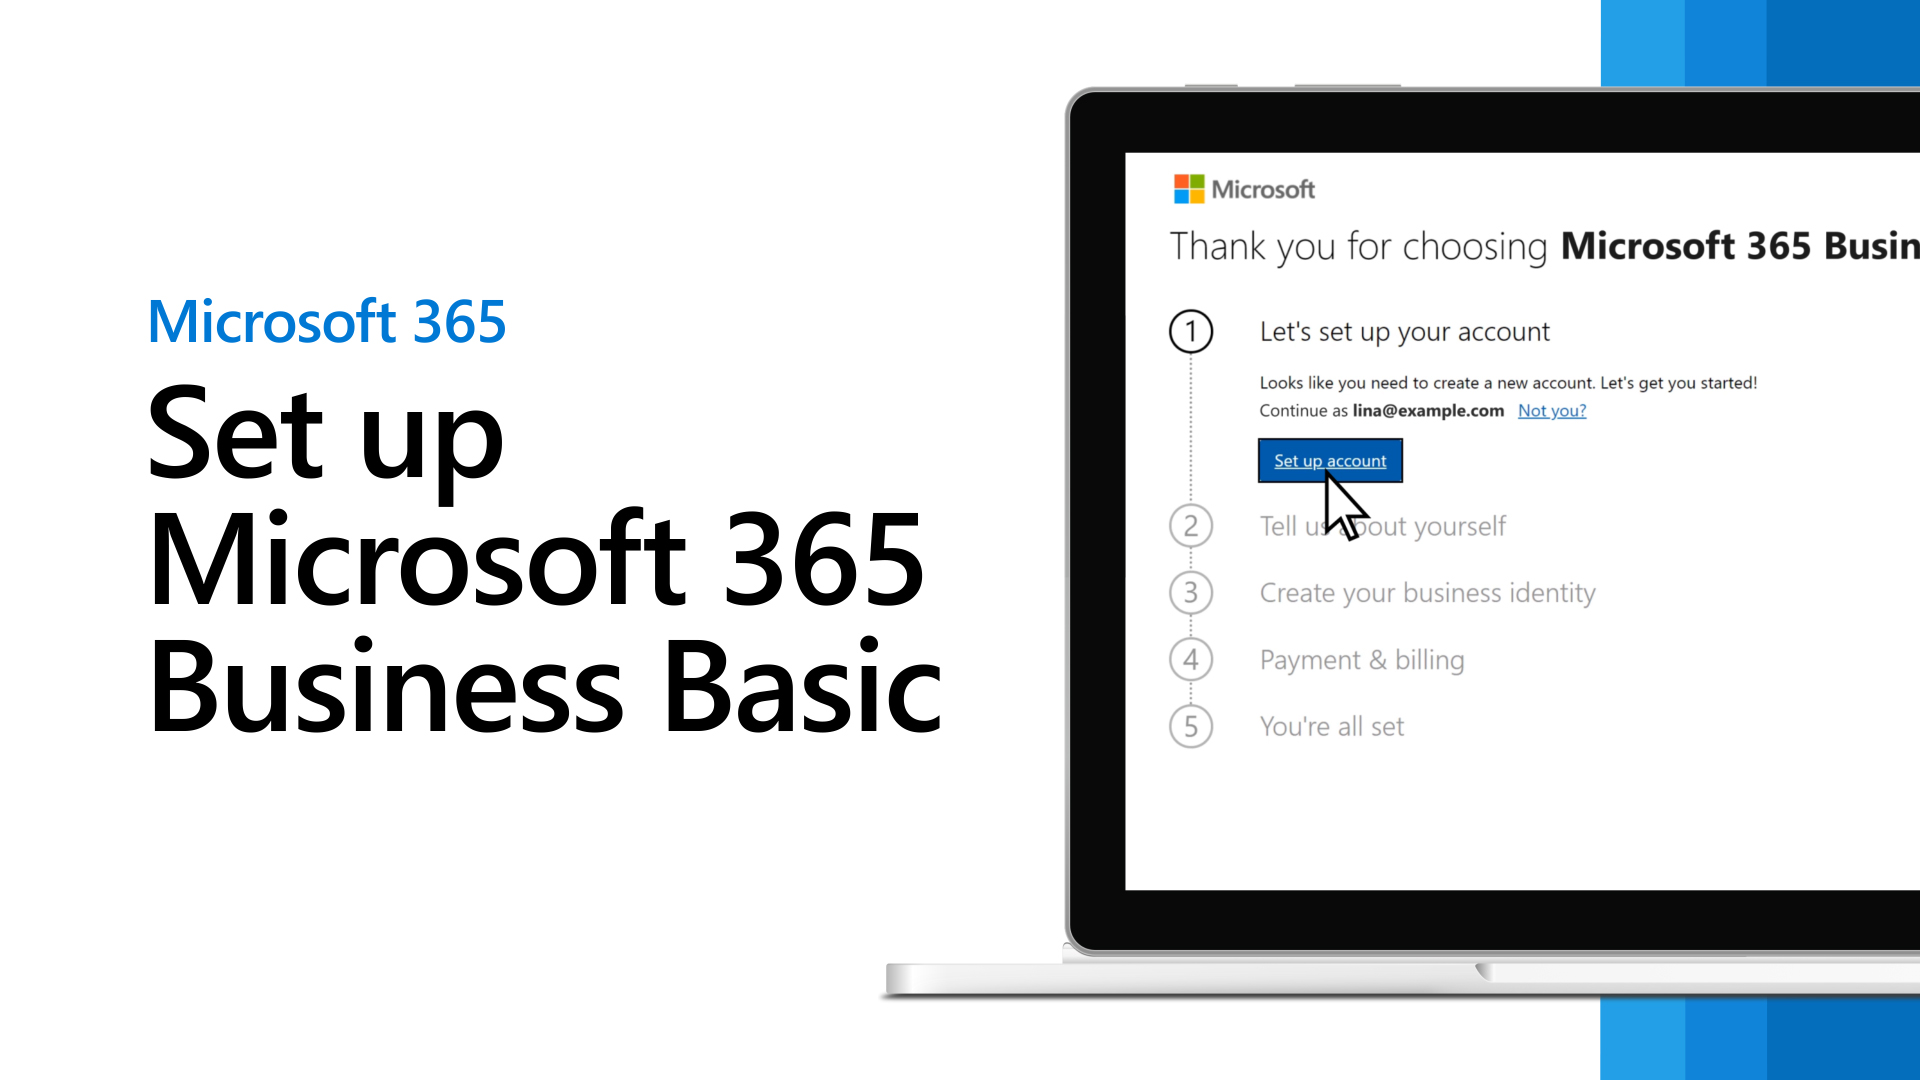 Microsoft 365 Business Basic: The Essential Suite for Small Businesses